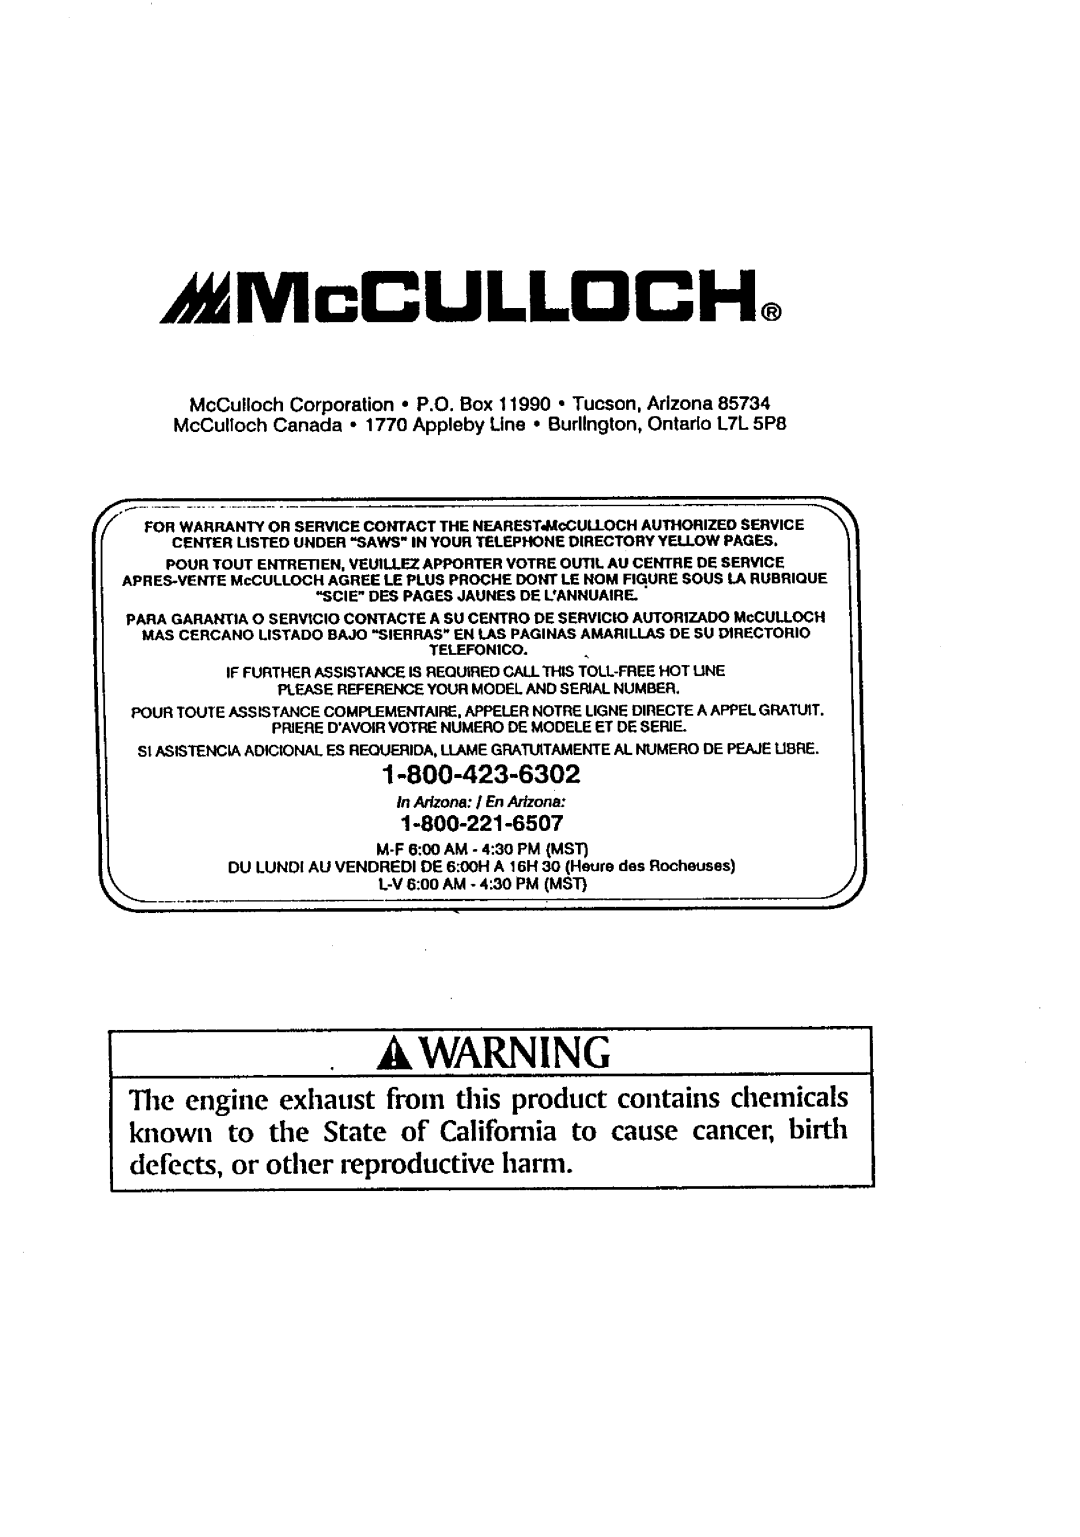 McCulloch MACE3210 user manual 1-800-423-6302, 1-800-221-6507, McCULLOCH, Awarning, defects, or other _productive harm 